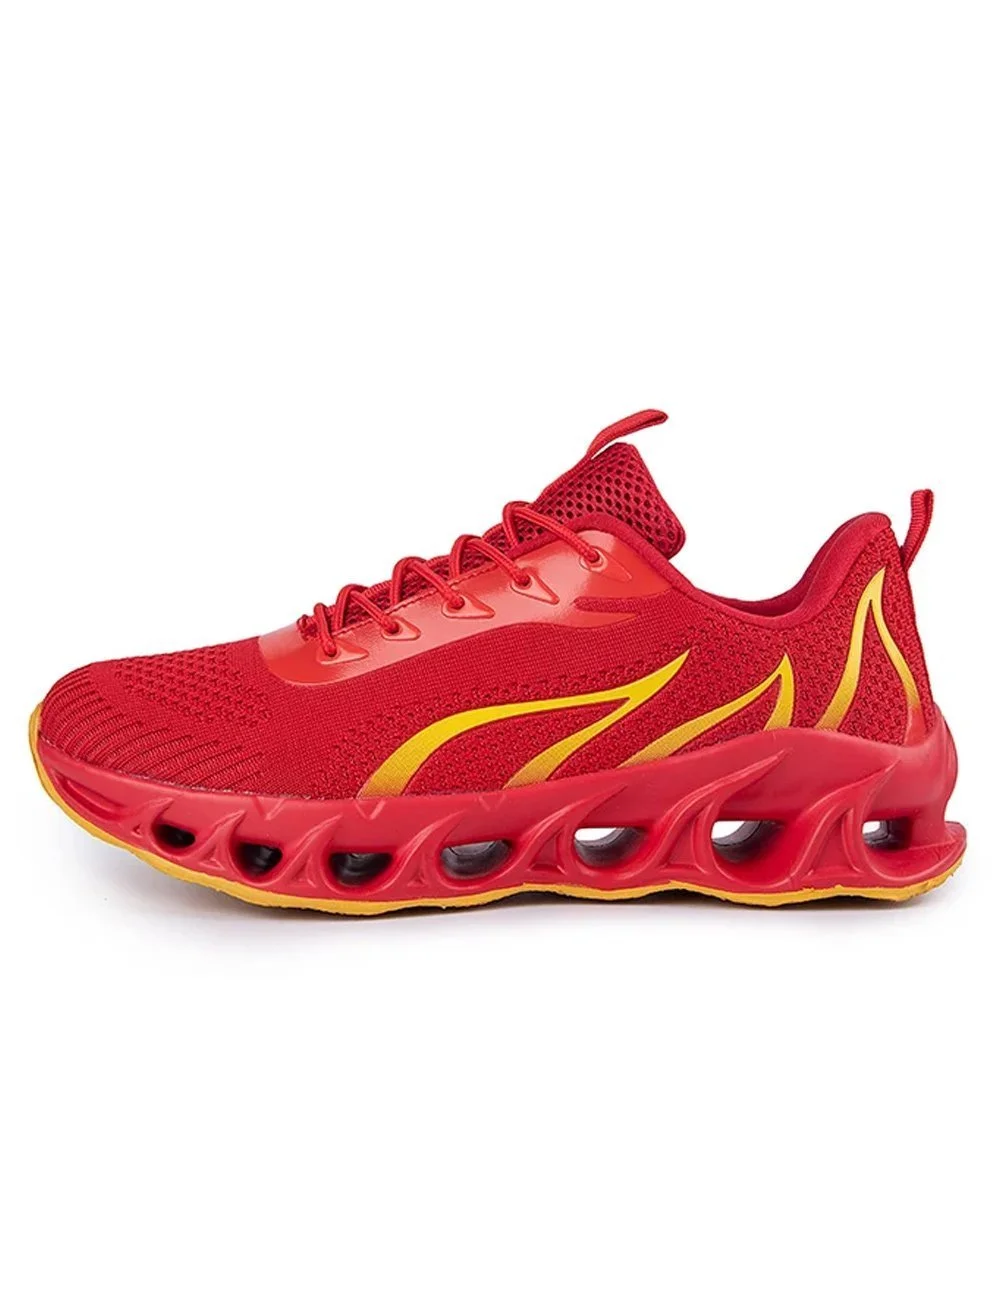 Men's Perfect Walking Shoes - Red